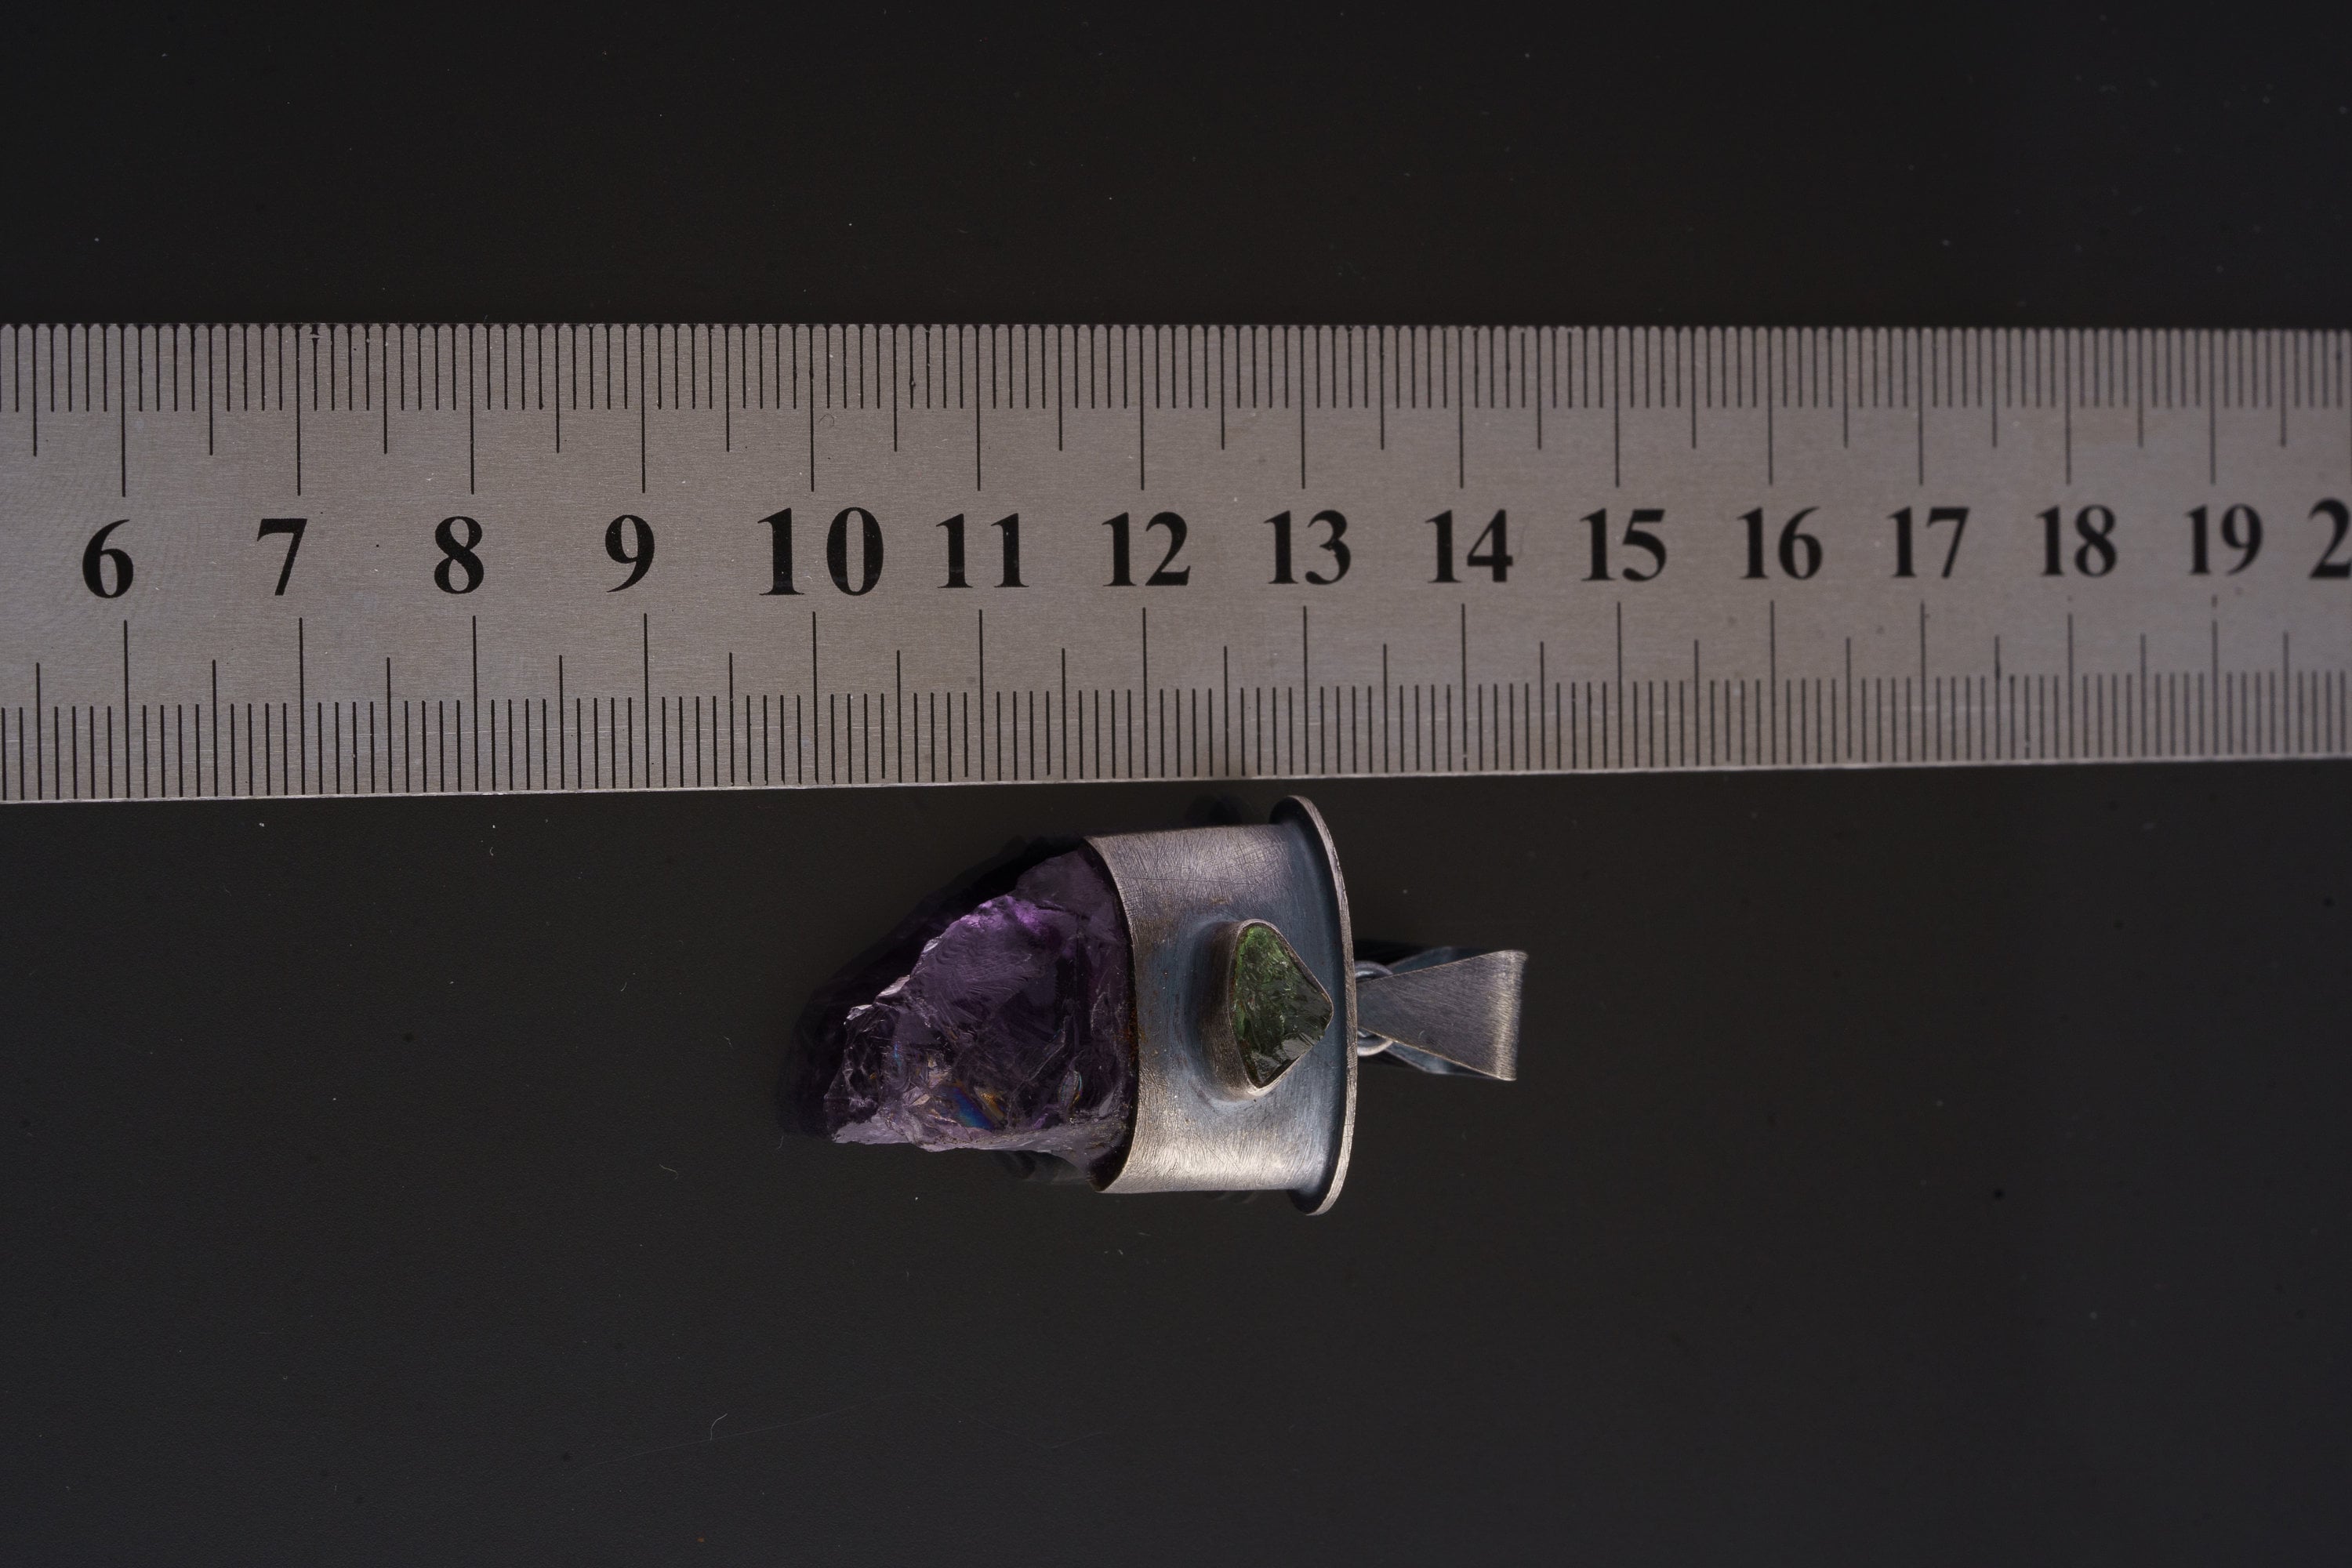 Raw Harmony - Tooth Like Facet Grade Amethyst & Green Gem Raw Tourmaline - Rustic Brush Texture Oxidised Sterling Silver - Crystal Pendant